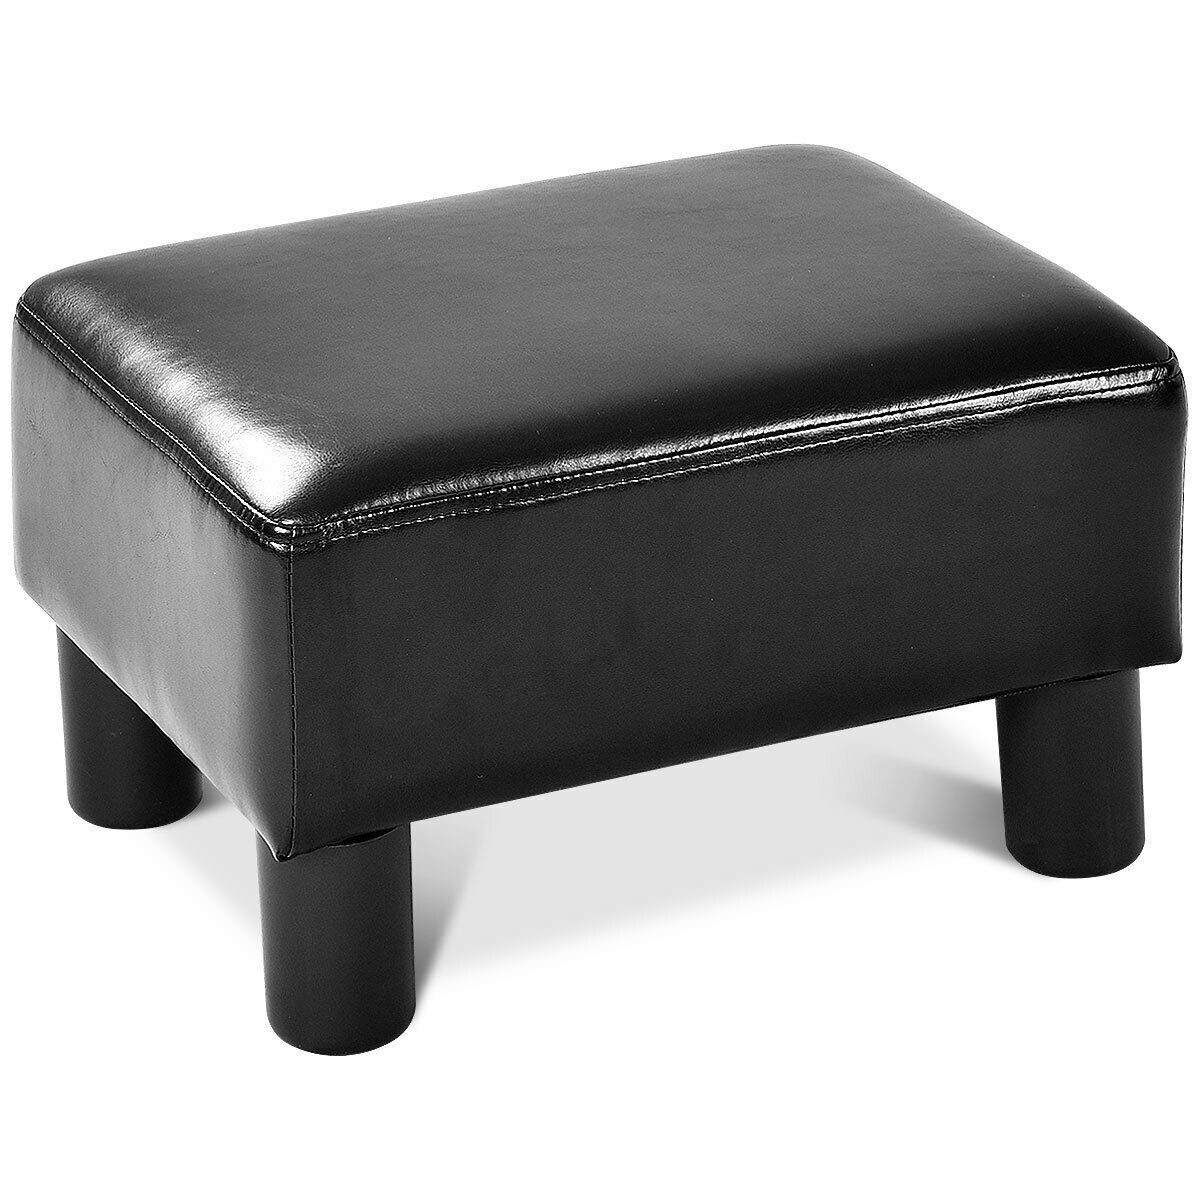 Small Ottoman Footrest Pu Leather Footstool Rectangular Seat Stool For Black Leather And Gray Canvas Pouf Ottomans (View 13 of 20)